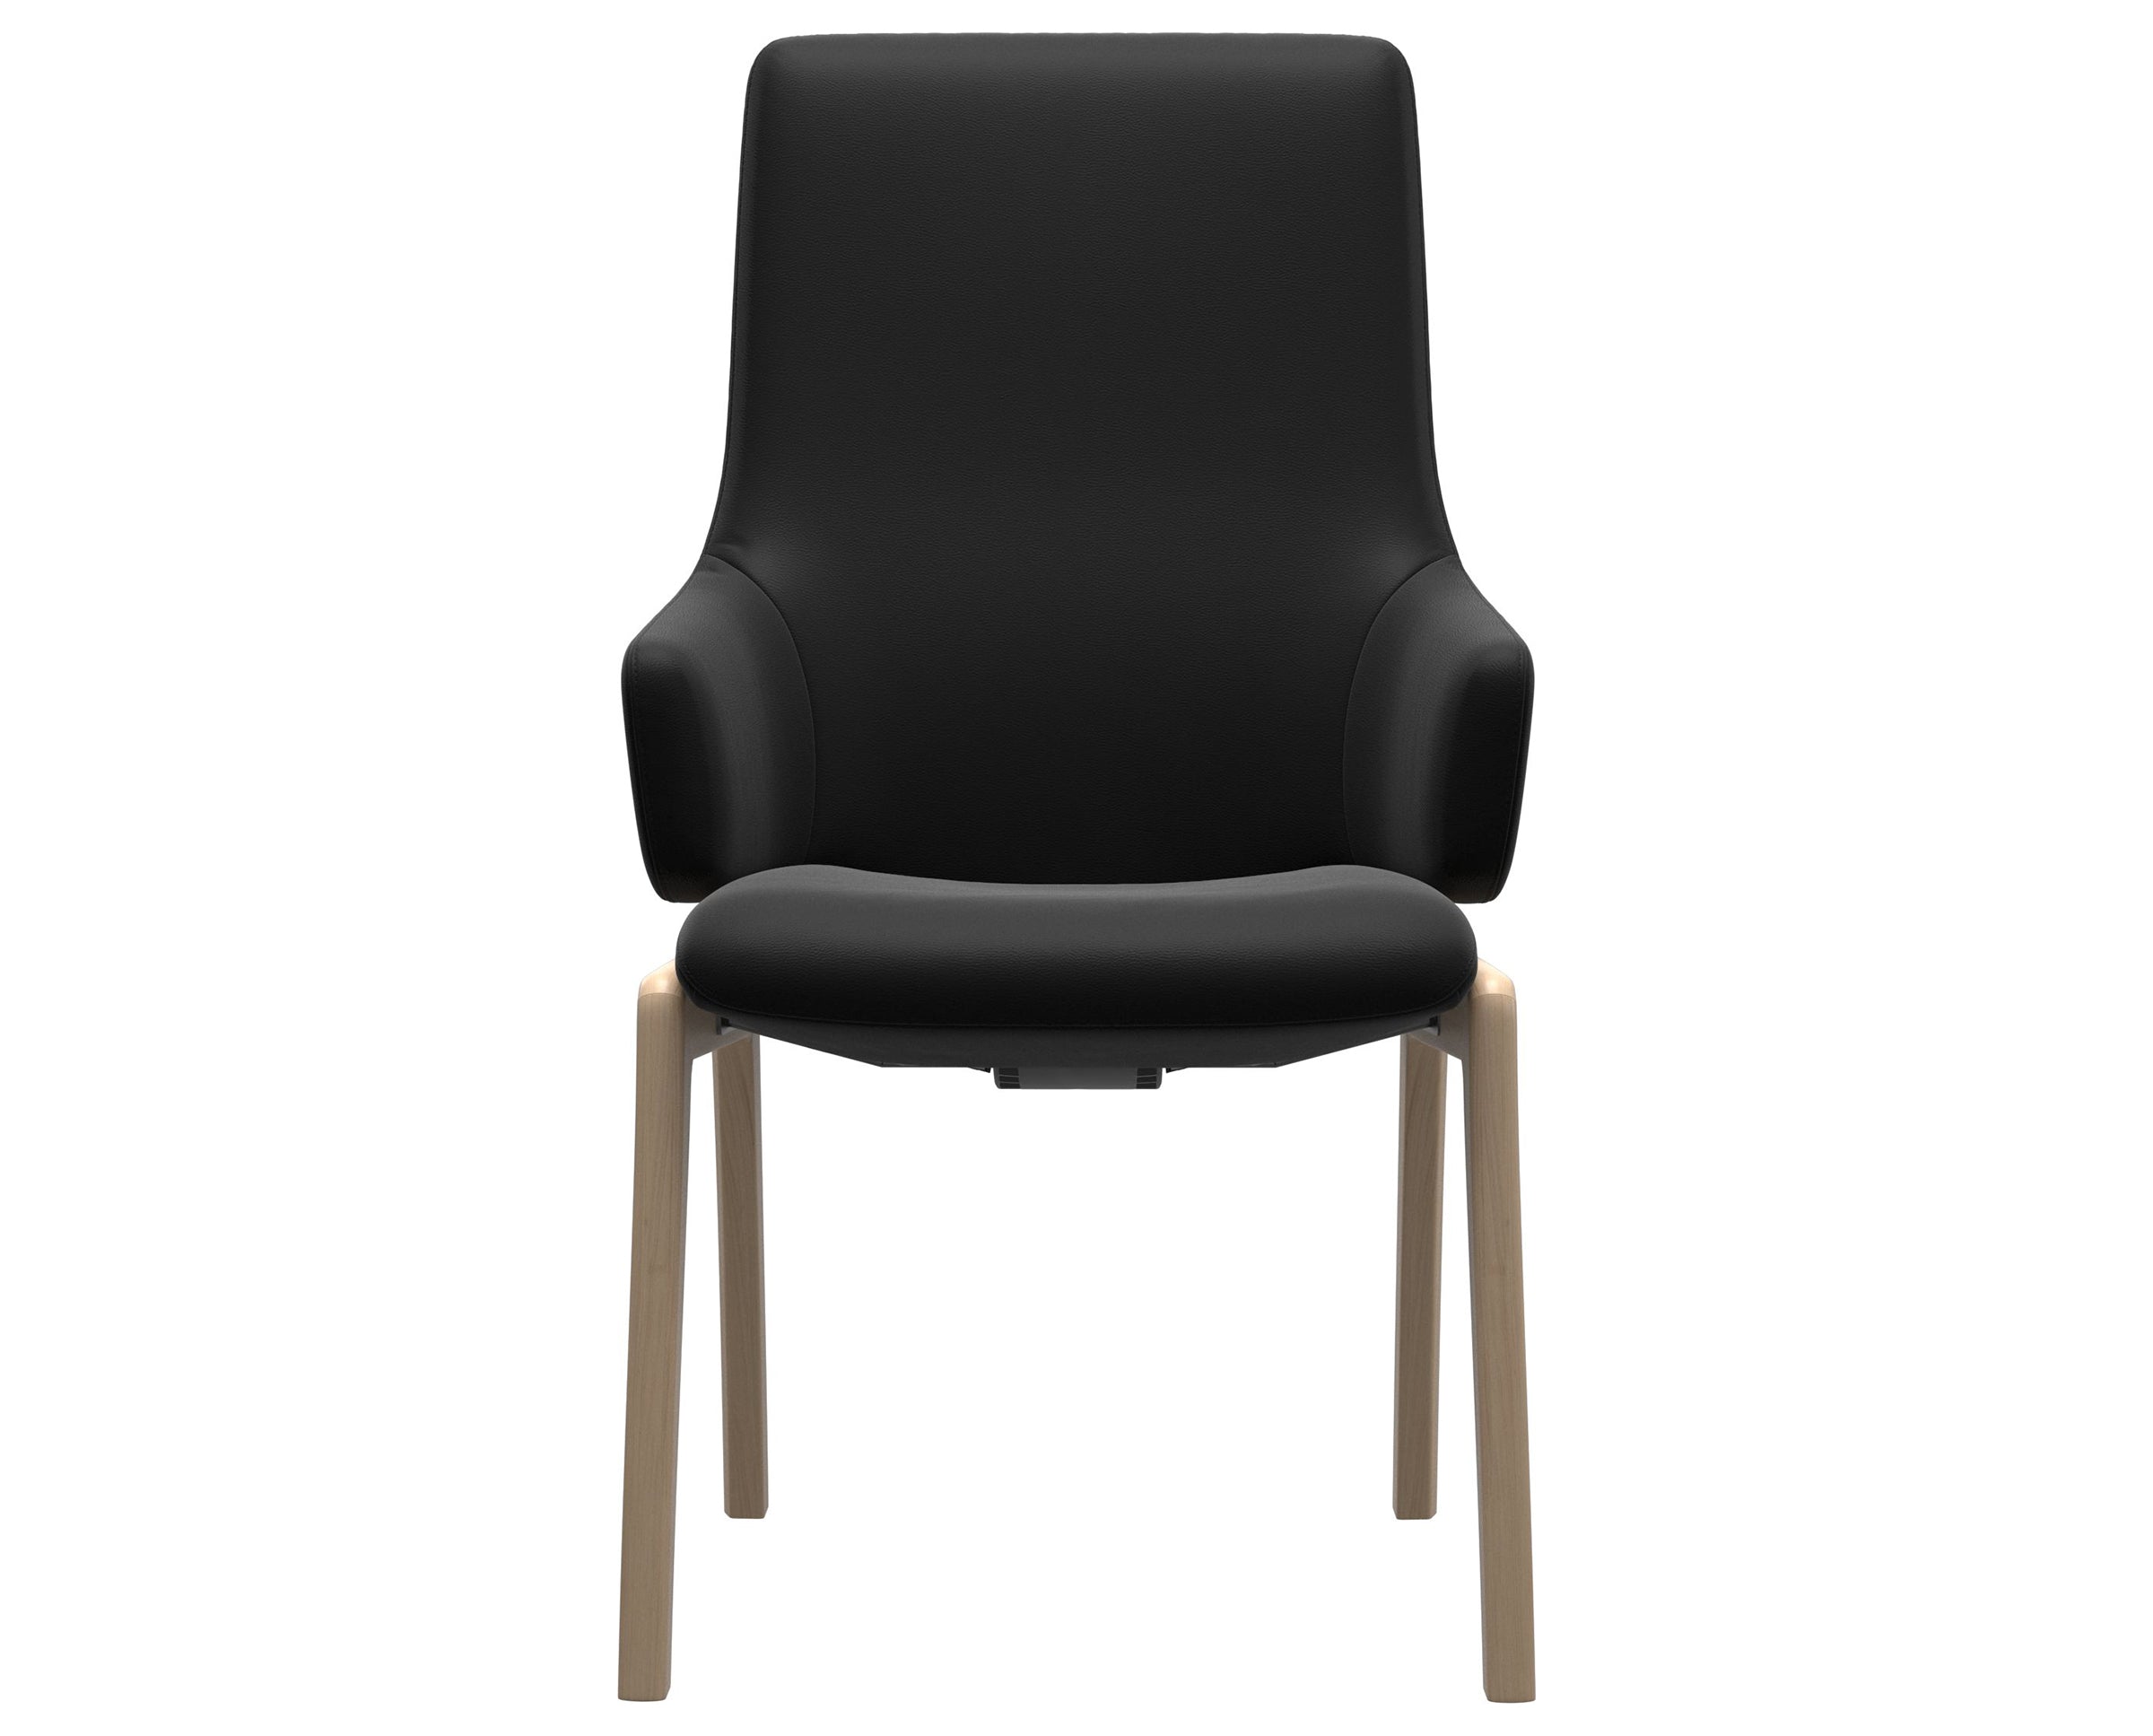 Paloma Leather Black and Natural Base | Stressless Laurel High Back D100 Dining Chair w/Arms | Valley Ridge Furniture